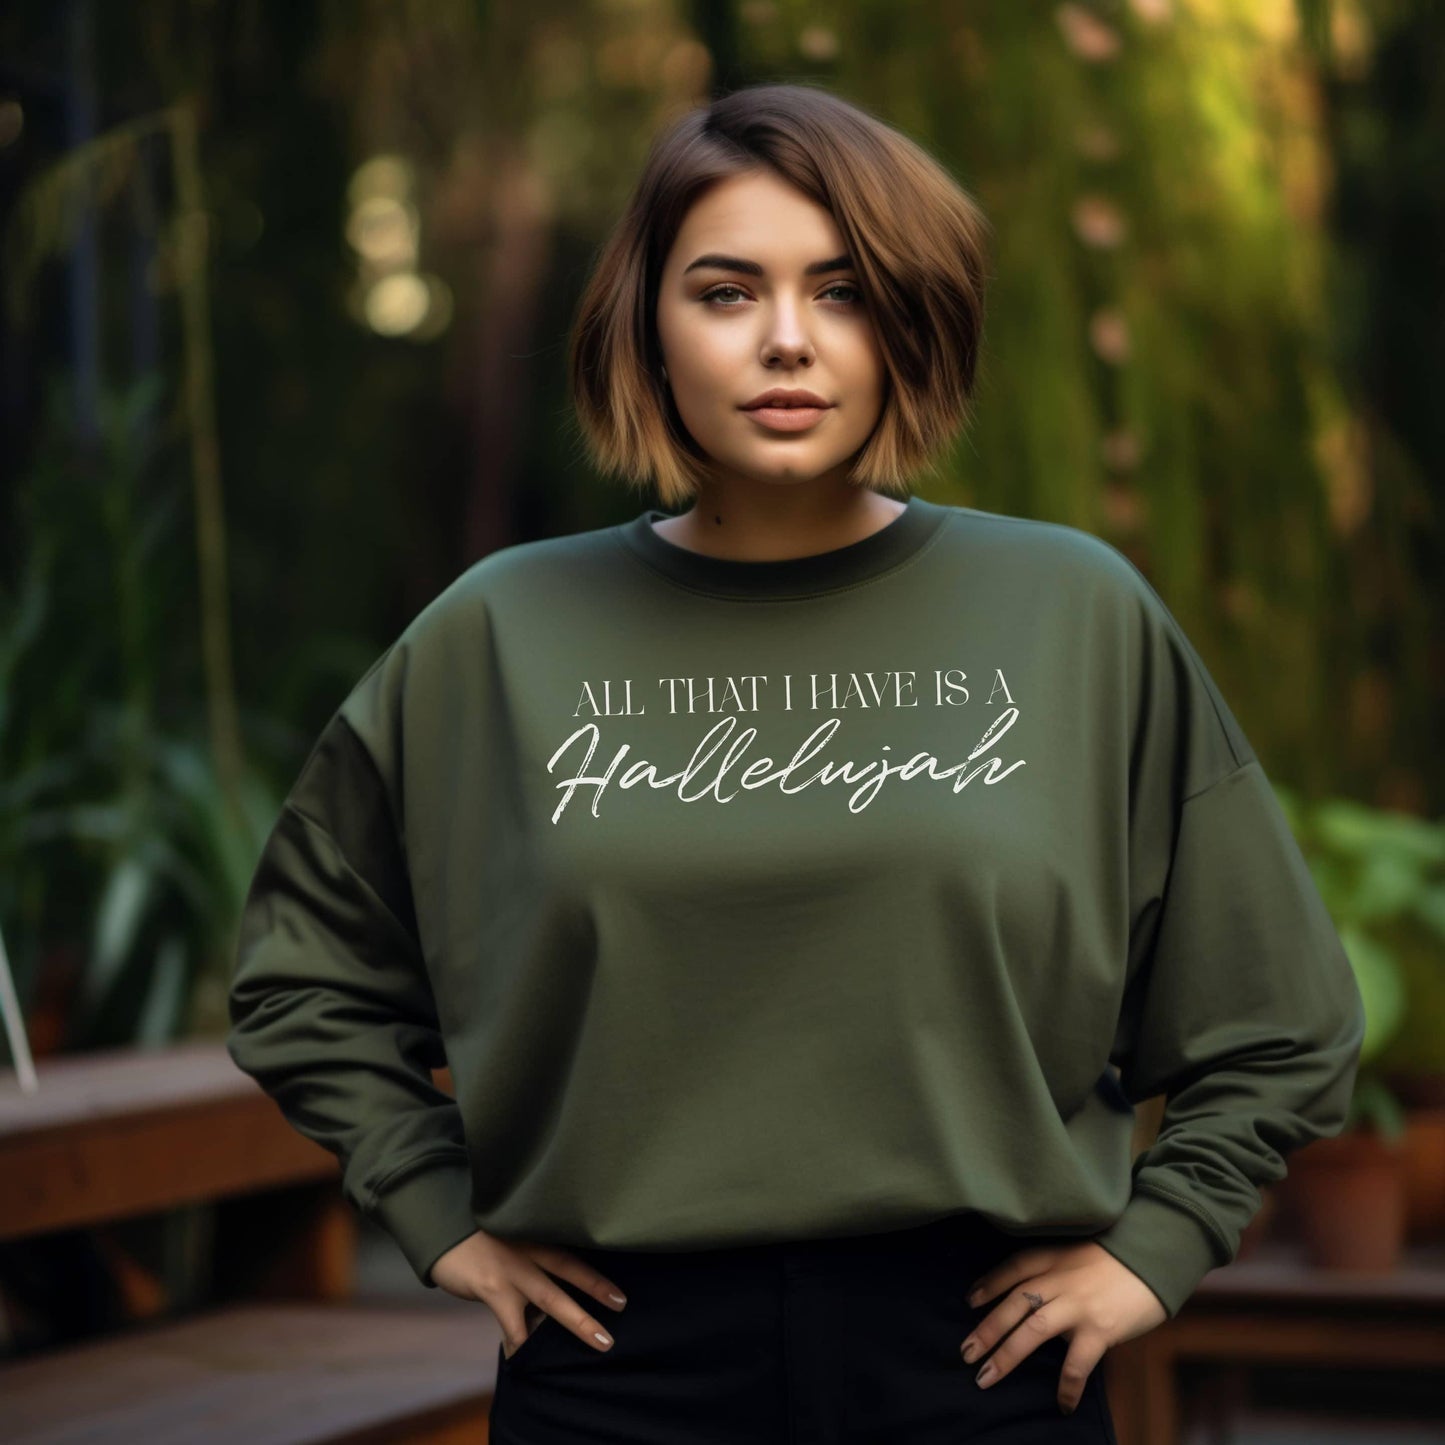 All That I Have Is A Hallelujah Women’s Plus Long Sleeve Tee - JT Footprint Apparel